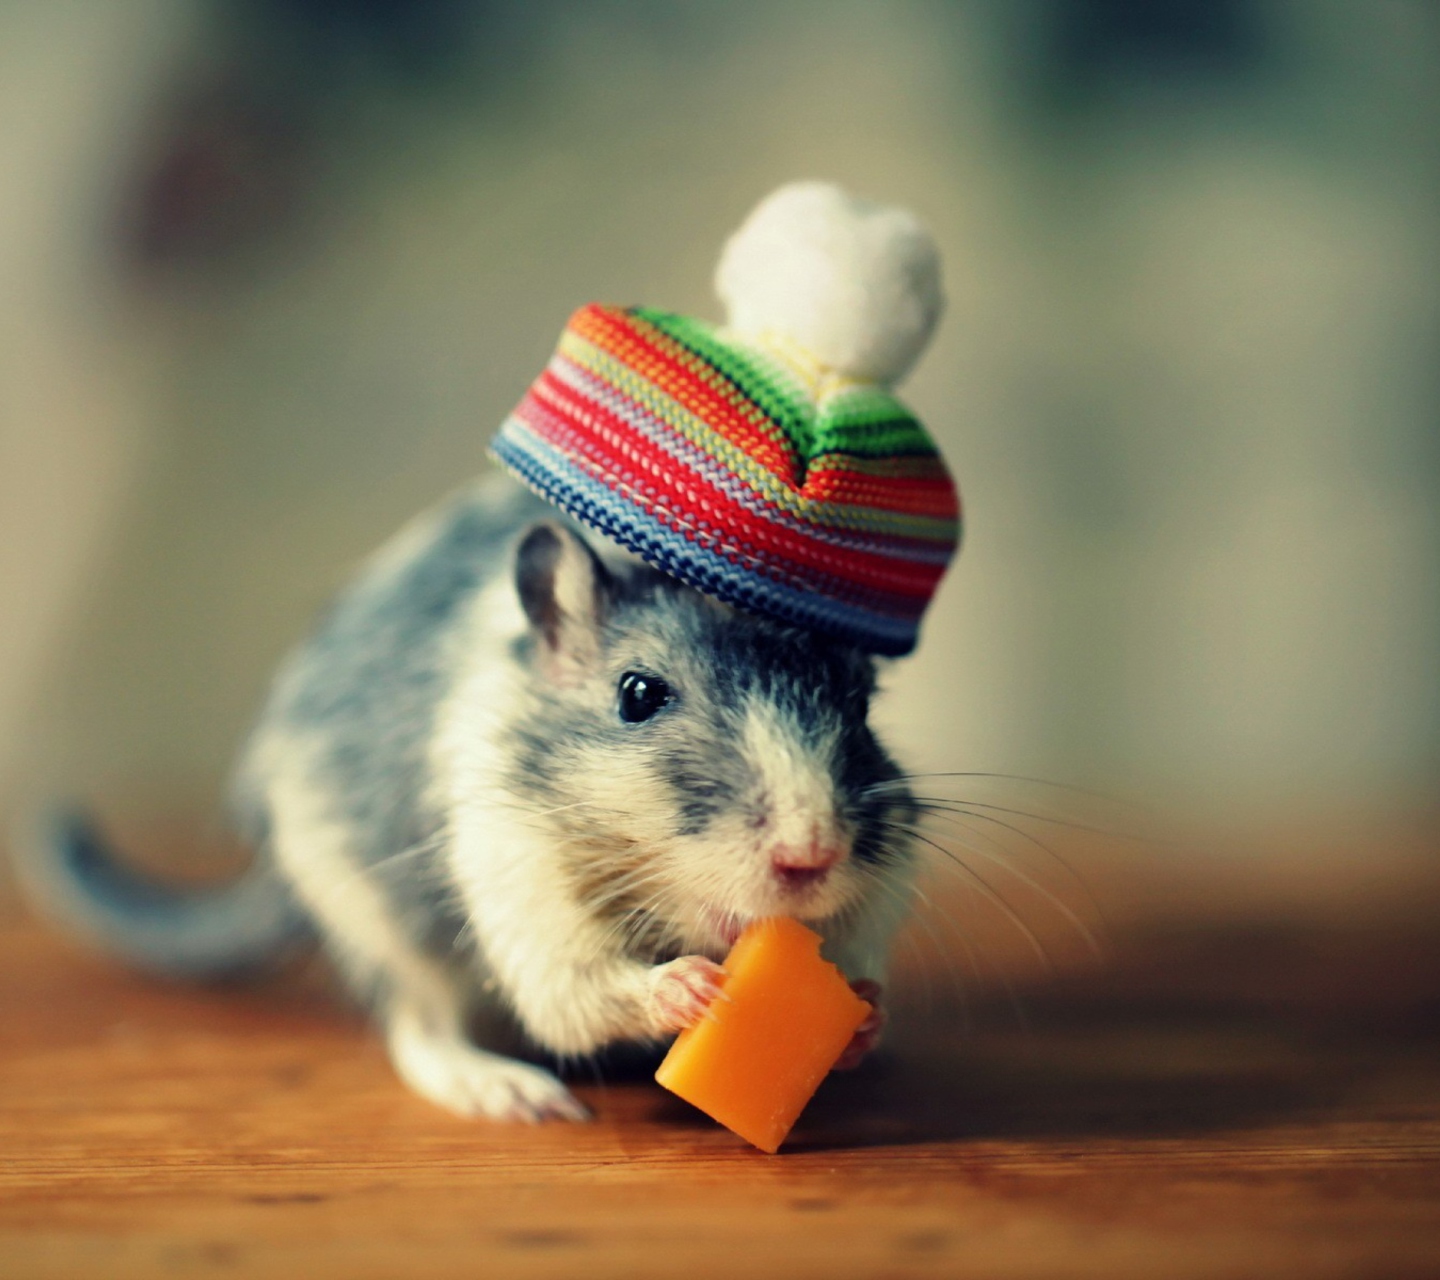 Das Mouse In Funny Little Hat Eating Cheese Wallpaper 1440x1280